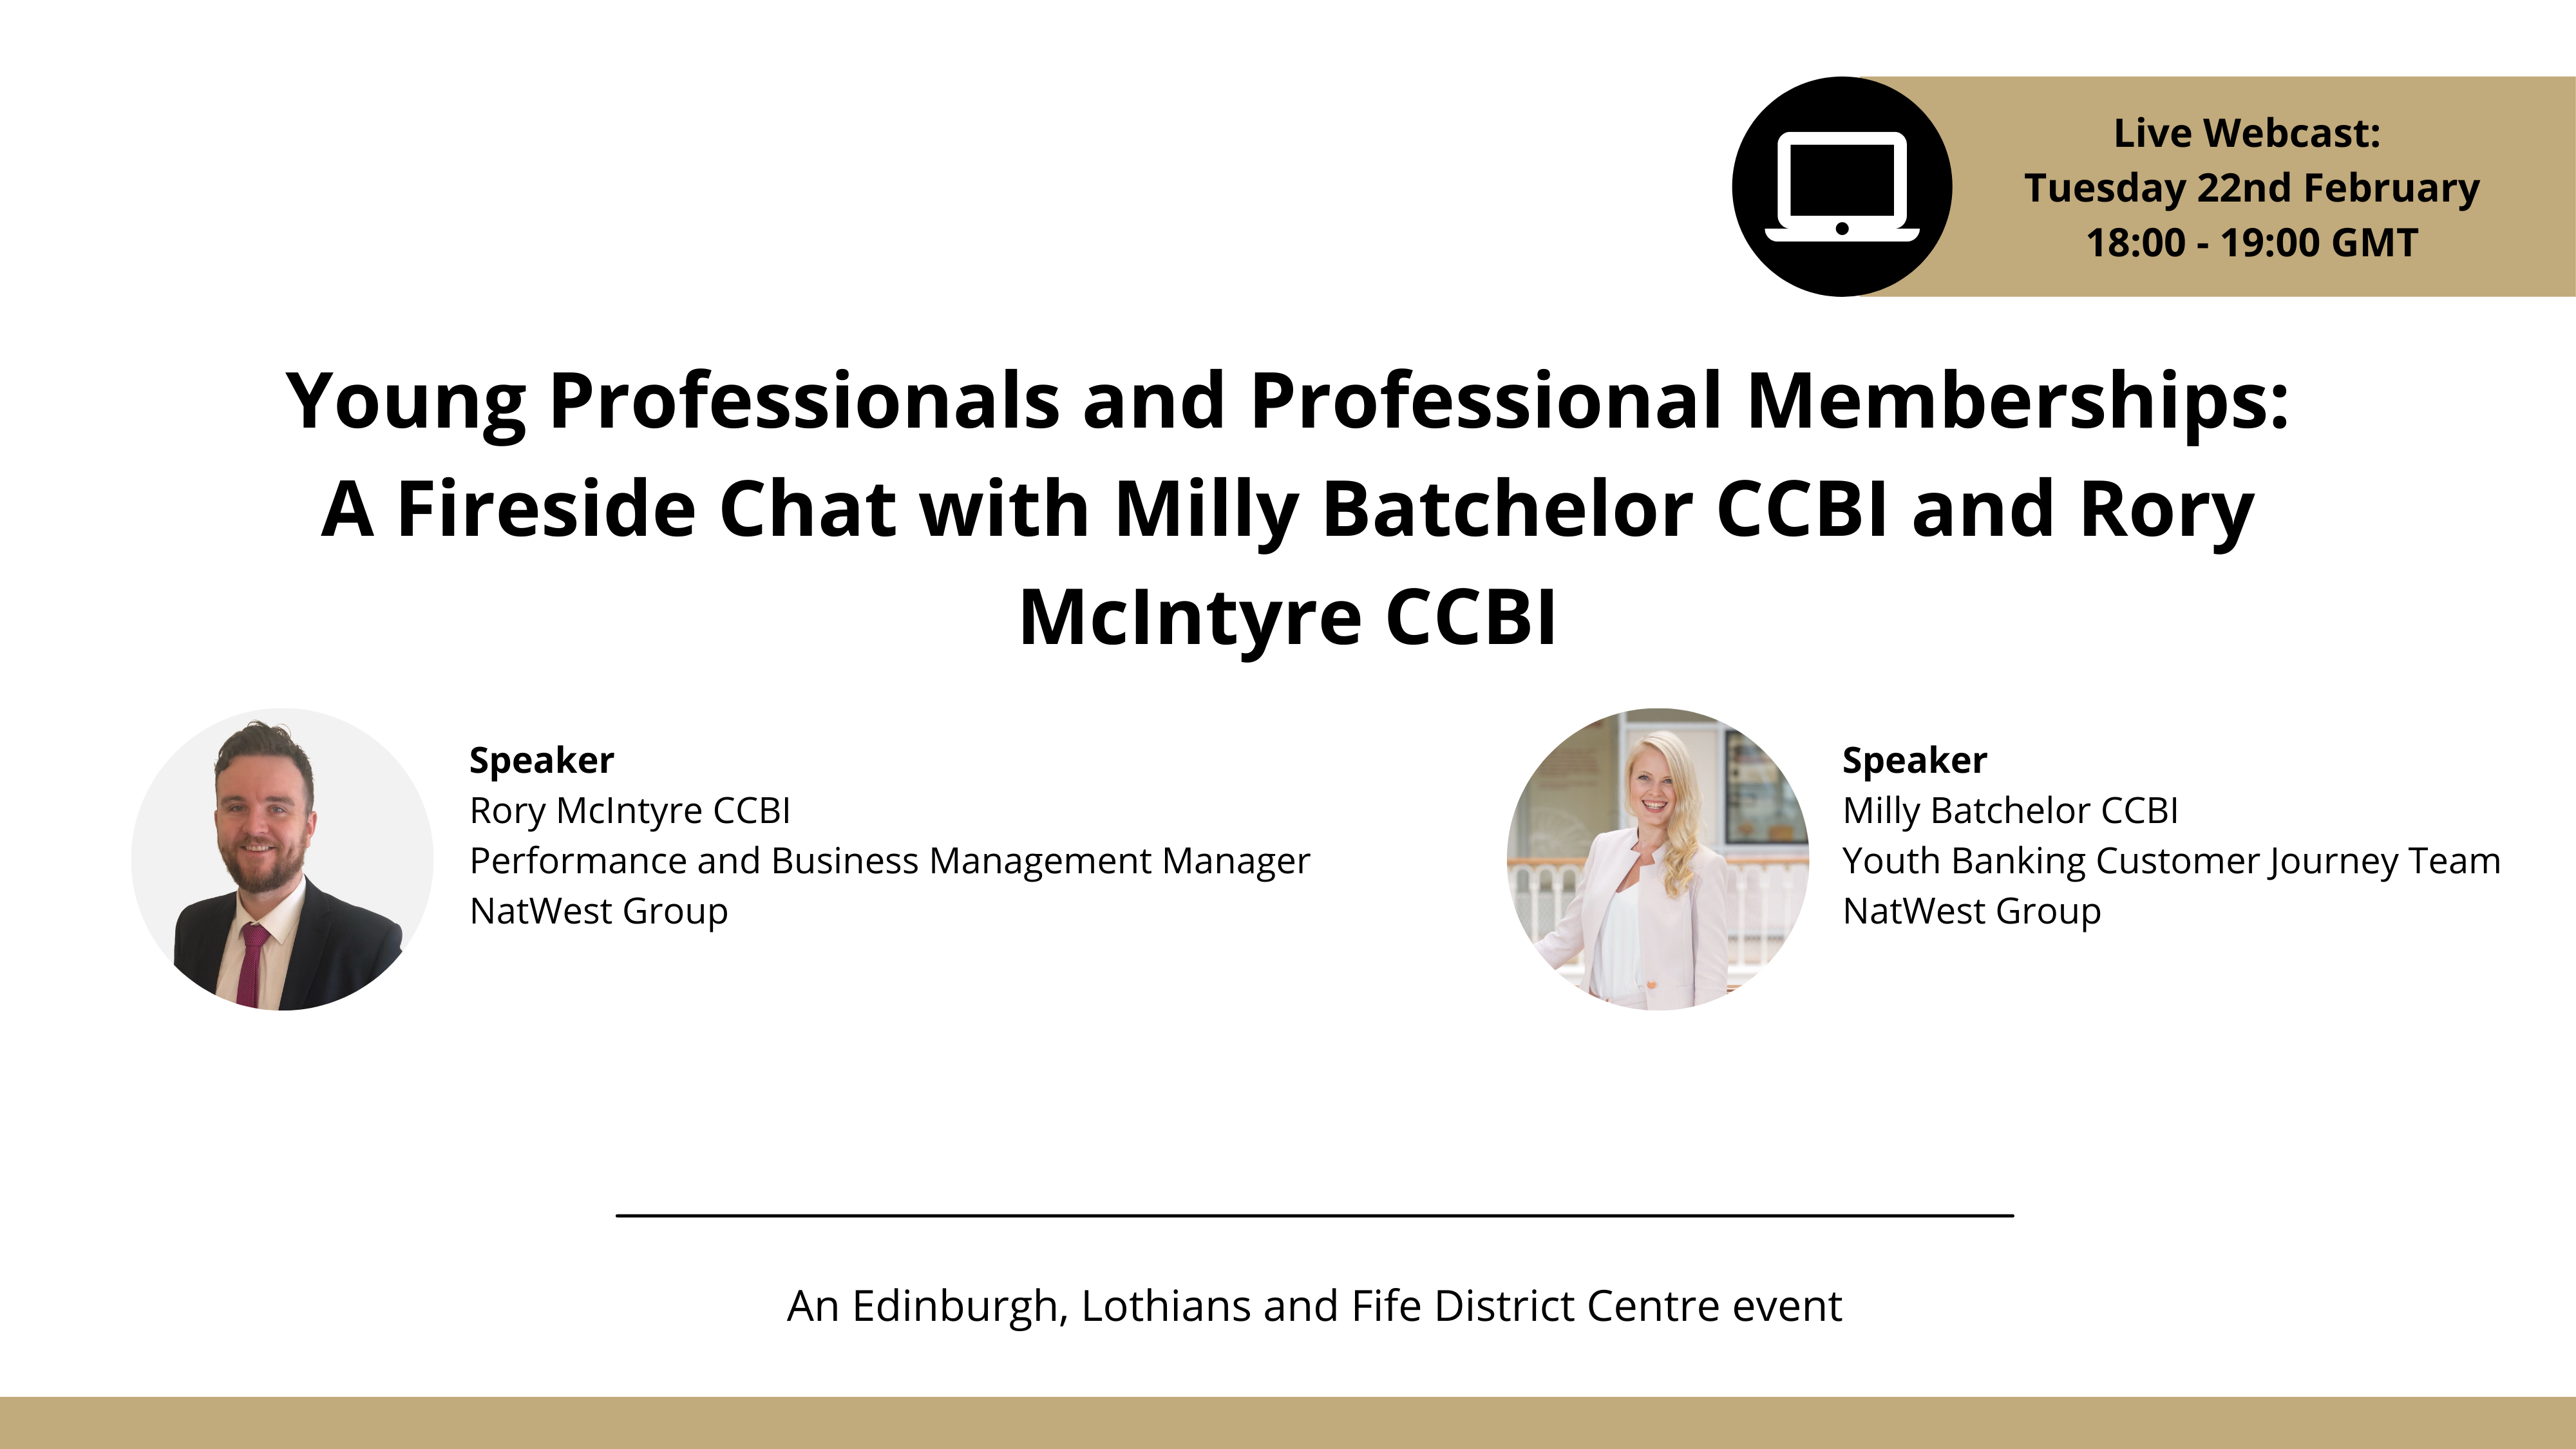 Young Professionals and Professional Memberships: A Fireside Chat with Milly Batchelor CCBI and Rory McIntyre CCBI